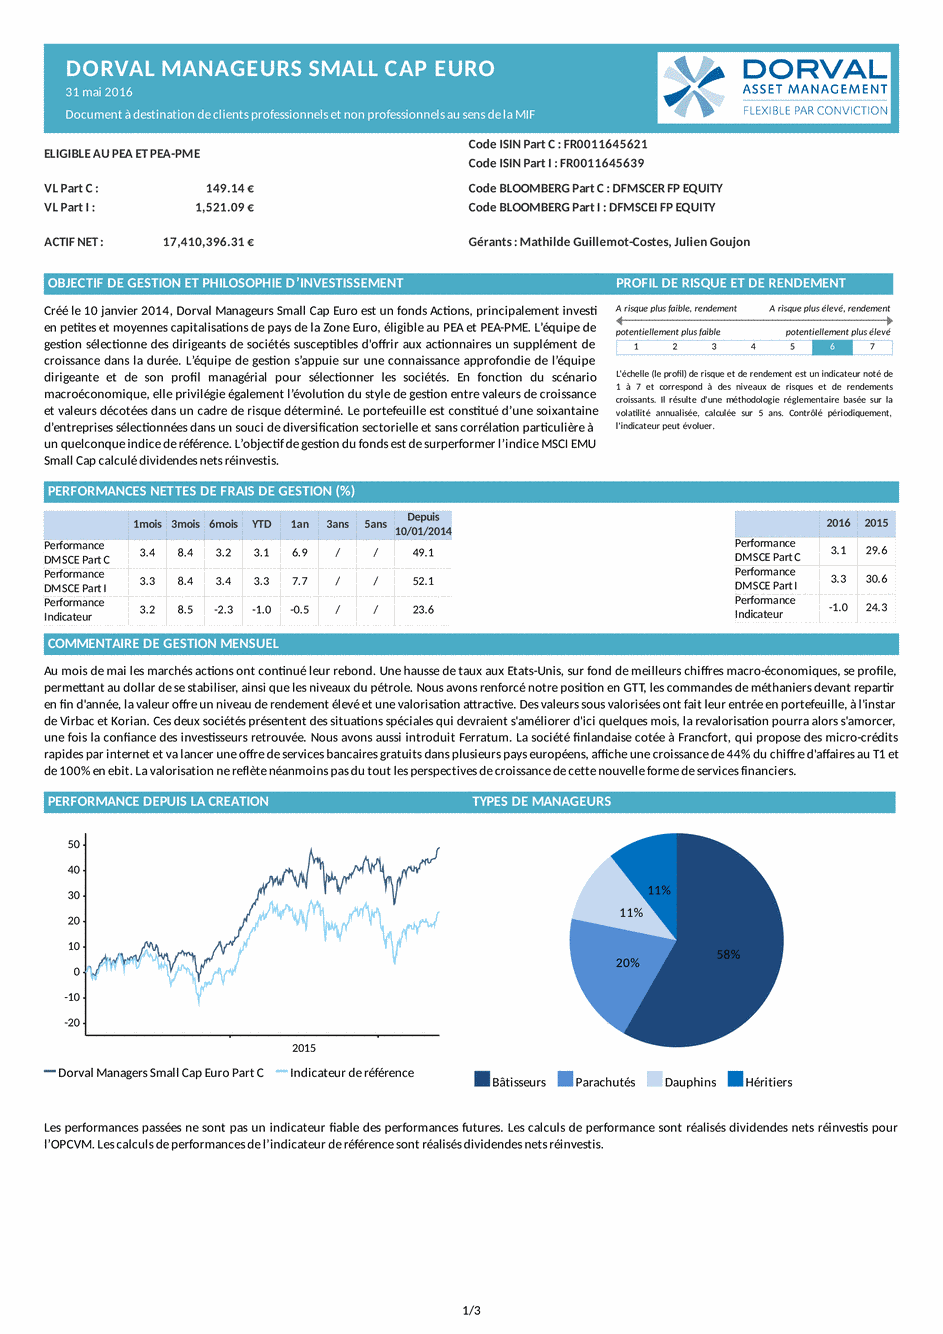 Reporting DORVAL MANAGEURS SMALL CAP EURO - 31/05/2016 - French